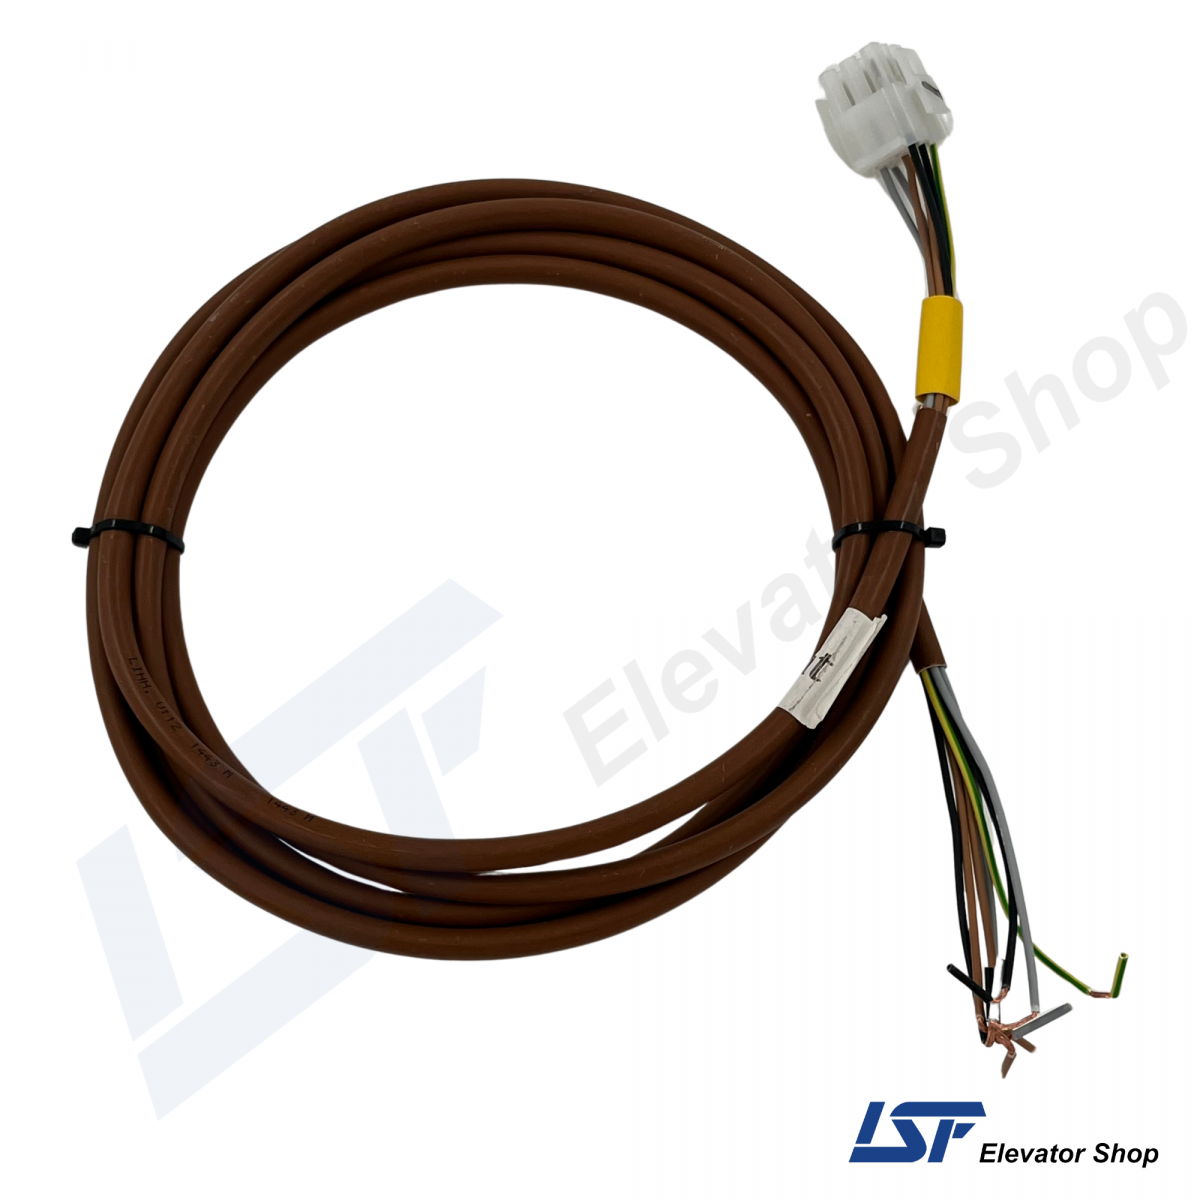 a brown cable with white connector (KBL-D3C-2 Arkel Door Contacts Cable 3m. for Elevator Systems)